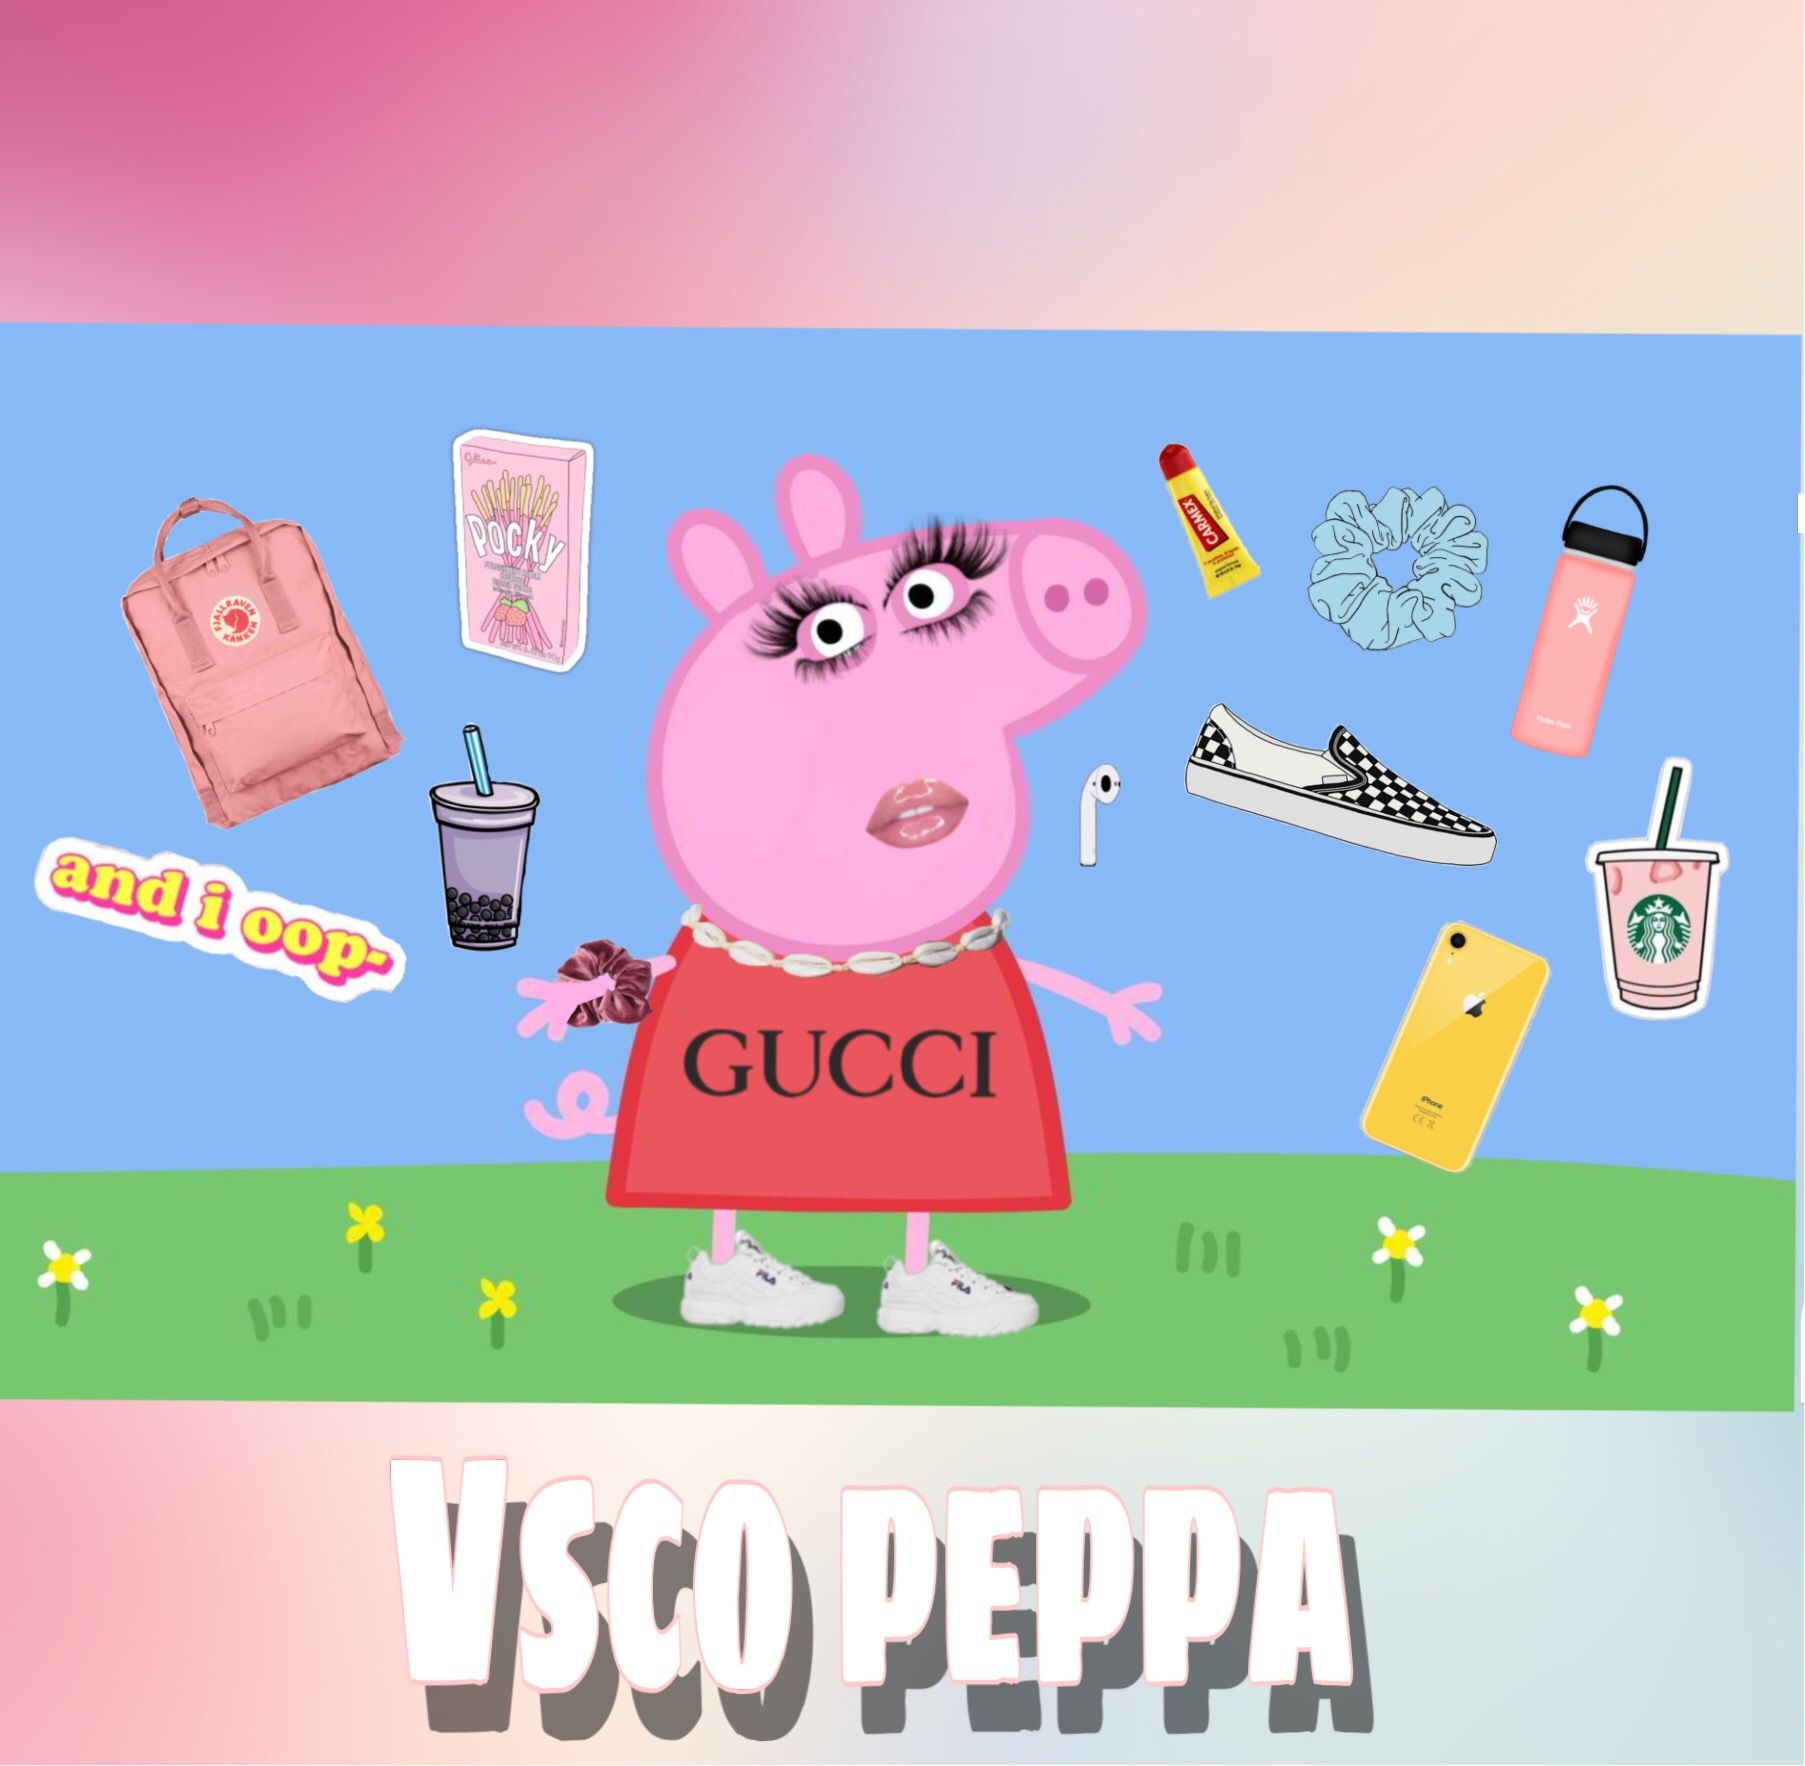 Peppa Pig Baddie Wallpapers Wallpaper Cave Search more hd transparent peppa pig image on kindpng. peppa pig baddie wallpapers wallpaper